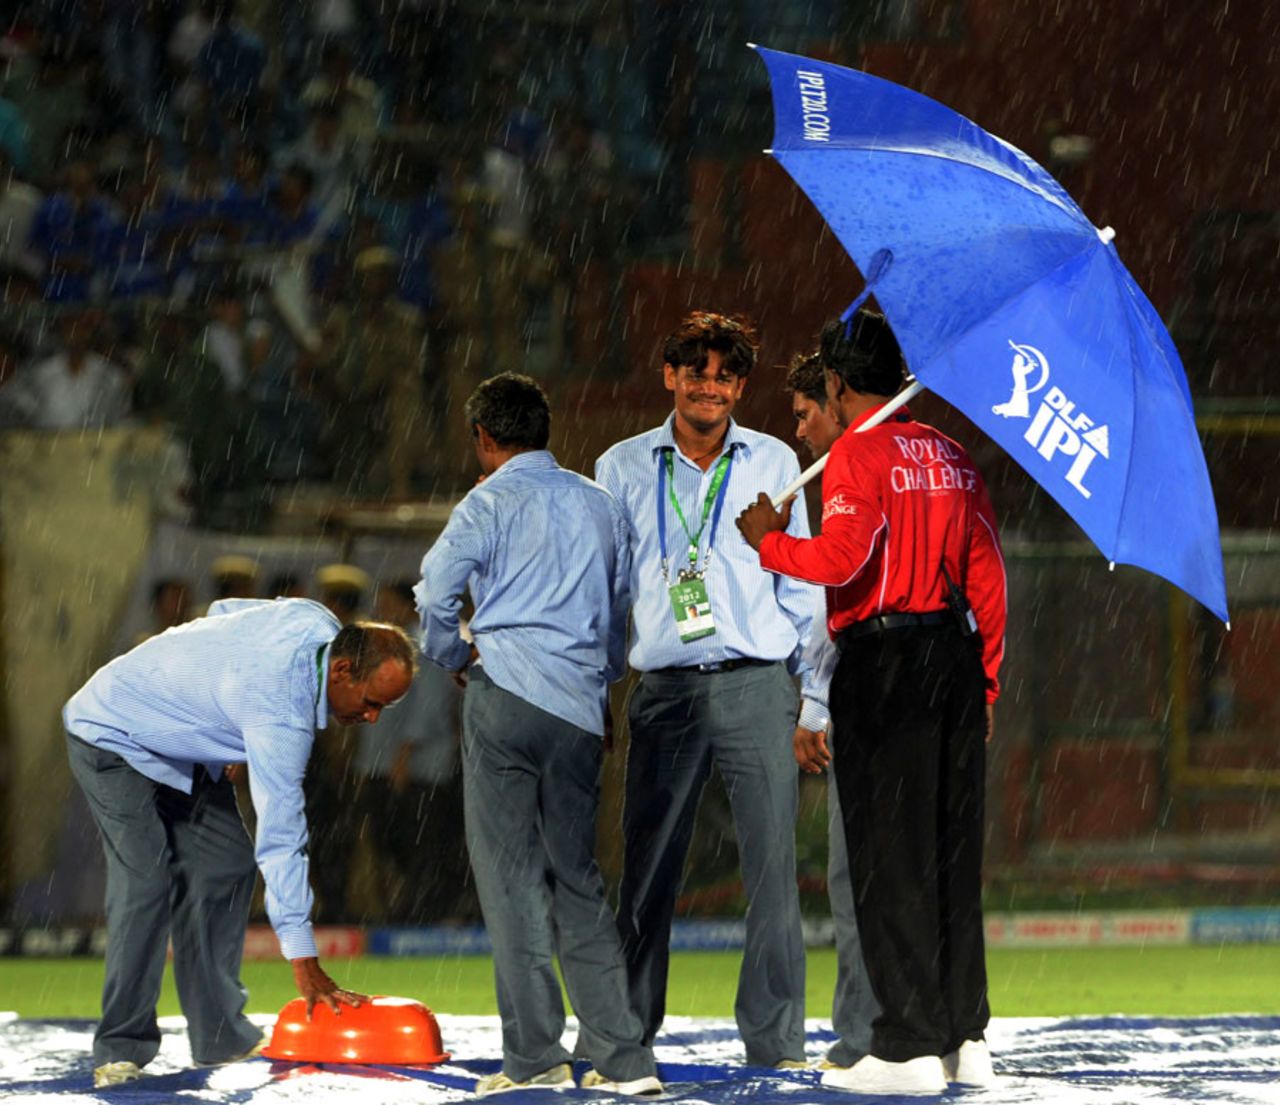 A persistent drizzle interrupted play early on, Rajasthan Royals v Chennai Super Kings, IPL, Jaipur, May 10, 2012